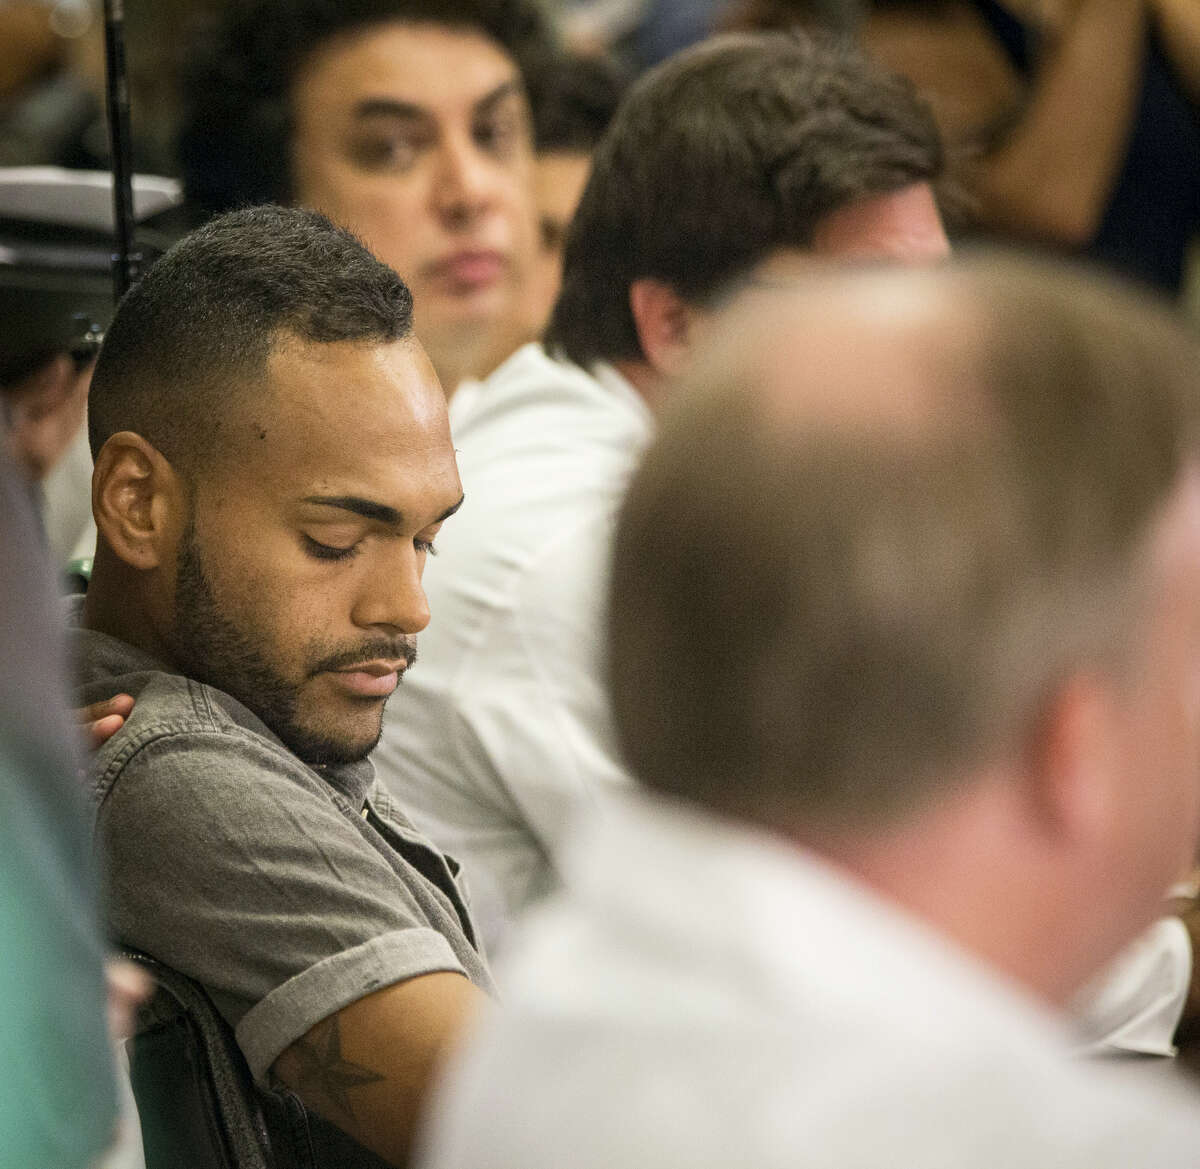 Angel Colon, a survivor of the mass shooting that killed dozens at an Orlando gay nightclub, speaks to the media for the first time at a press conference at the Orlando Regional Medical Center in Orlando, Fla., on Tuesday, June 14, 2016. Colon’s life was saved by the efforts of the trauma surgeons at Orlando Regional Medical Center, according to the hospital.